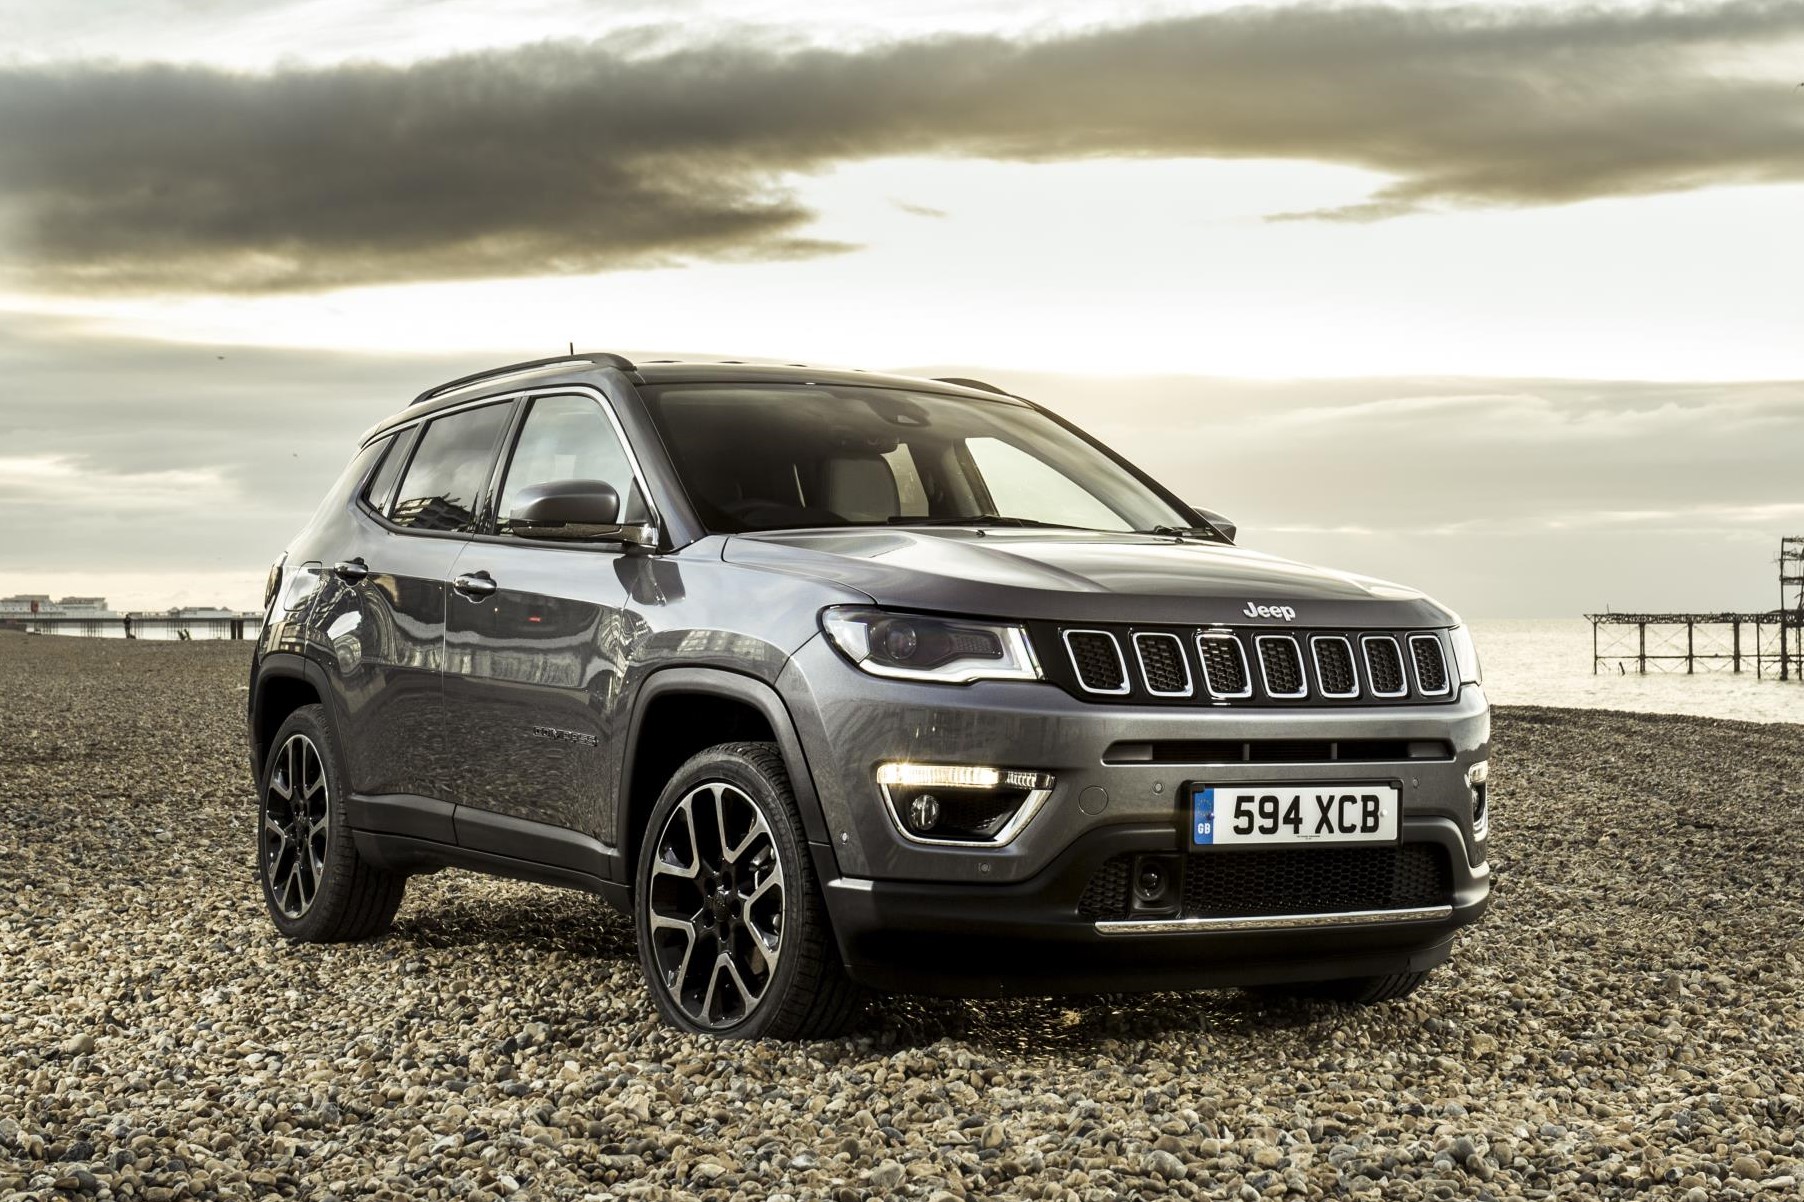 Compass 2018. Jeep Compass 2018. Jeep Compass 2019. Jeep Compass 2018 Offroad. Jeep Compass Limited 2017 2018.